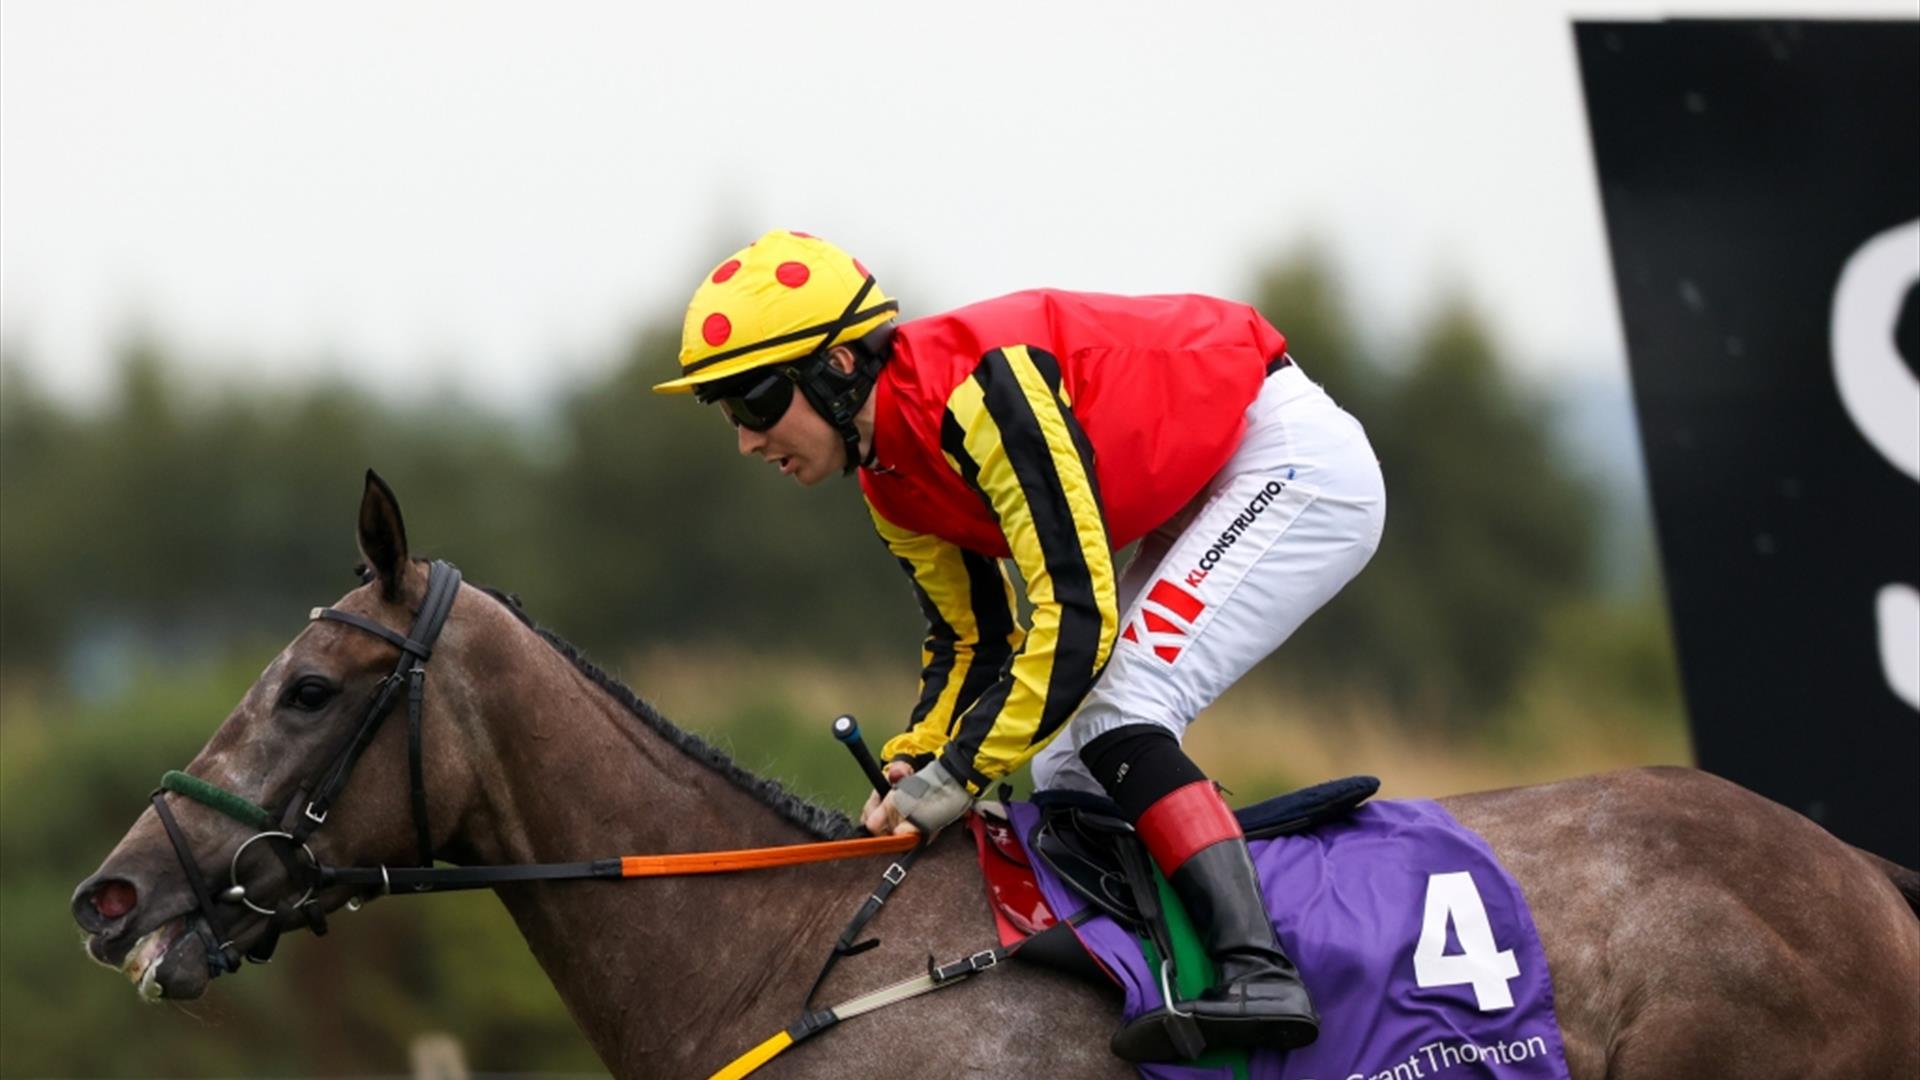 Picture of jockey in red riding on horse